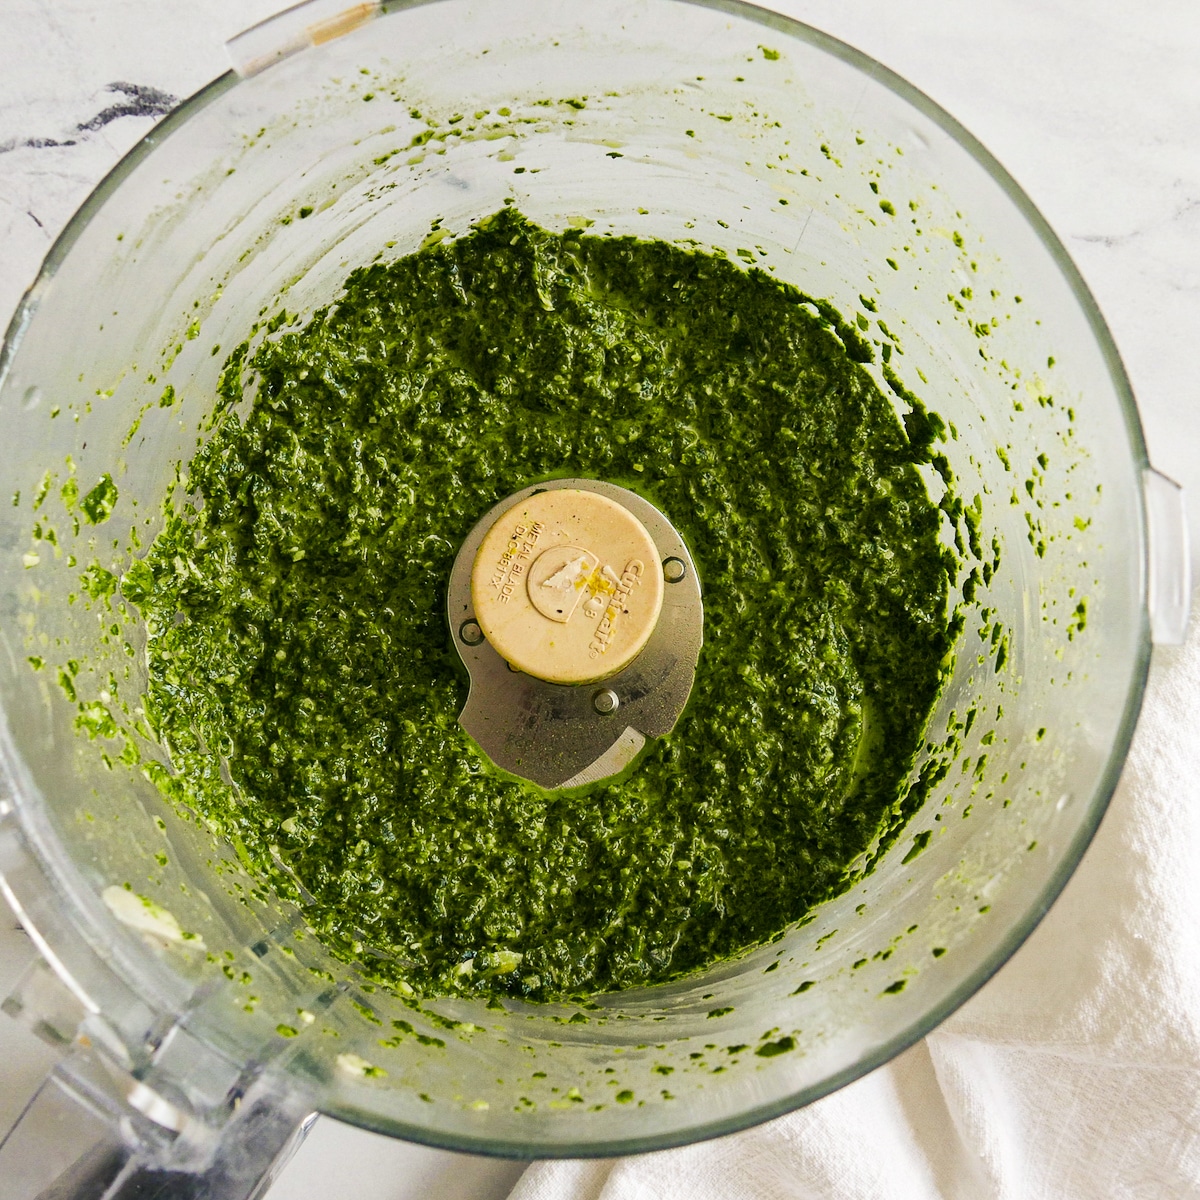 Green pasta sauce ingredients blended in a food processor.